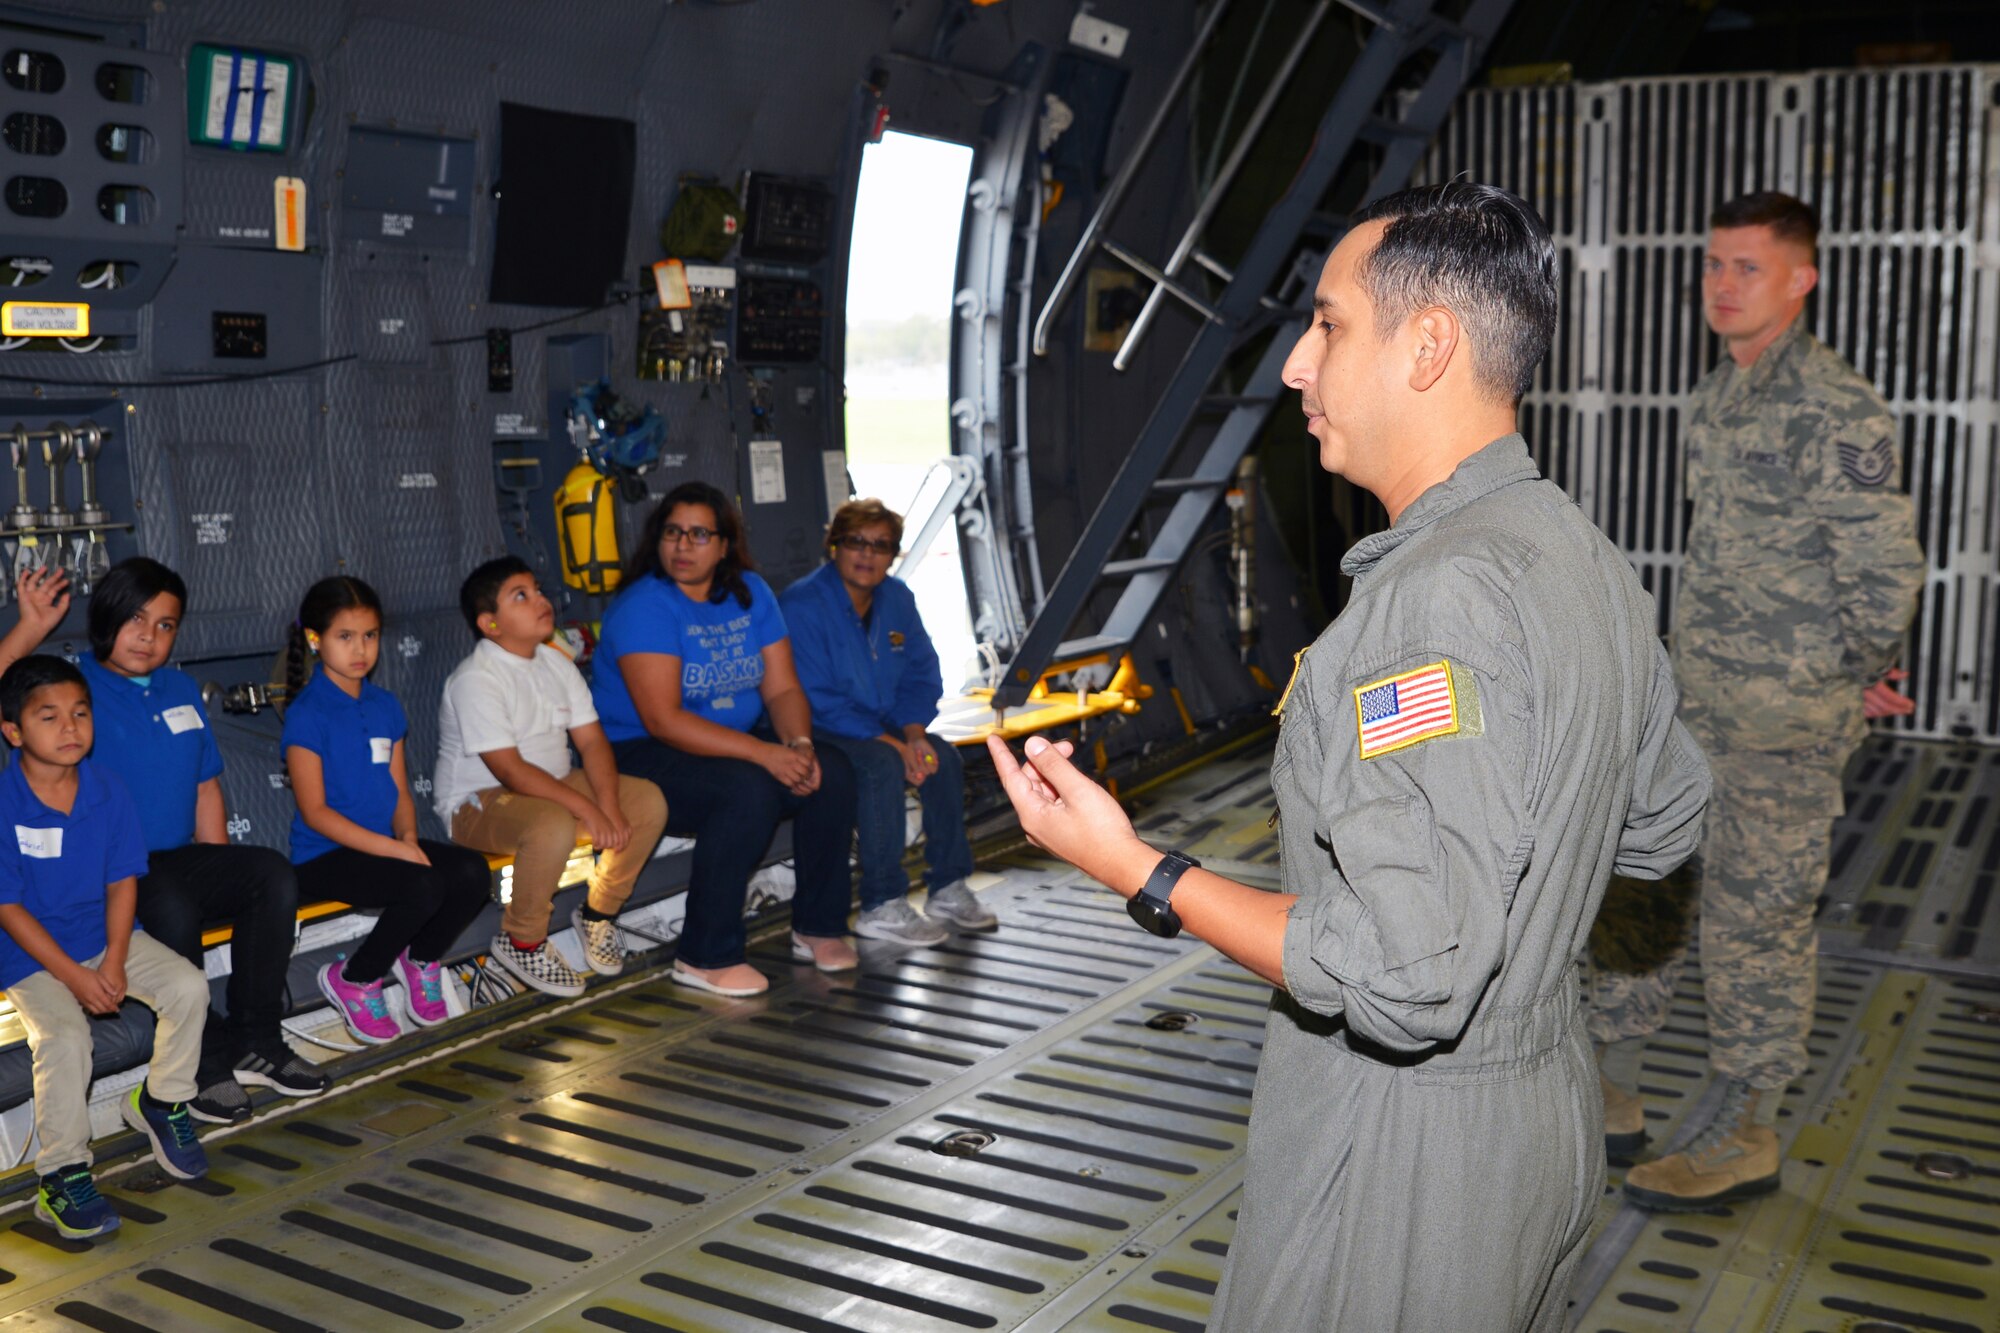 Staff Sgt. Anthony B. Molina, 68th Airlift Squadron flight engineer, and Tech. Sgt. Luke W. Christiansen, 433rd Maintenance Group, maintenance operations center production controller, describe the capabilities of the C-5M Super Galaxy to students with Mildred Baskin Elementary students at Joint Base San Antonio-Lackland, Texas Nov. 5, 2018.